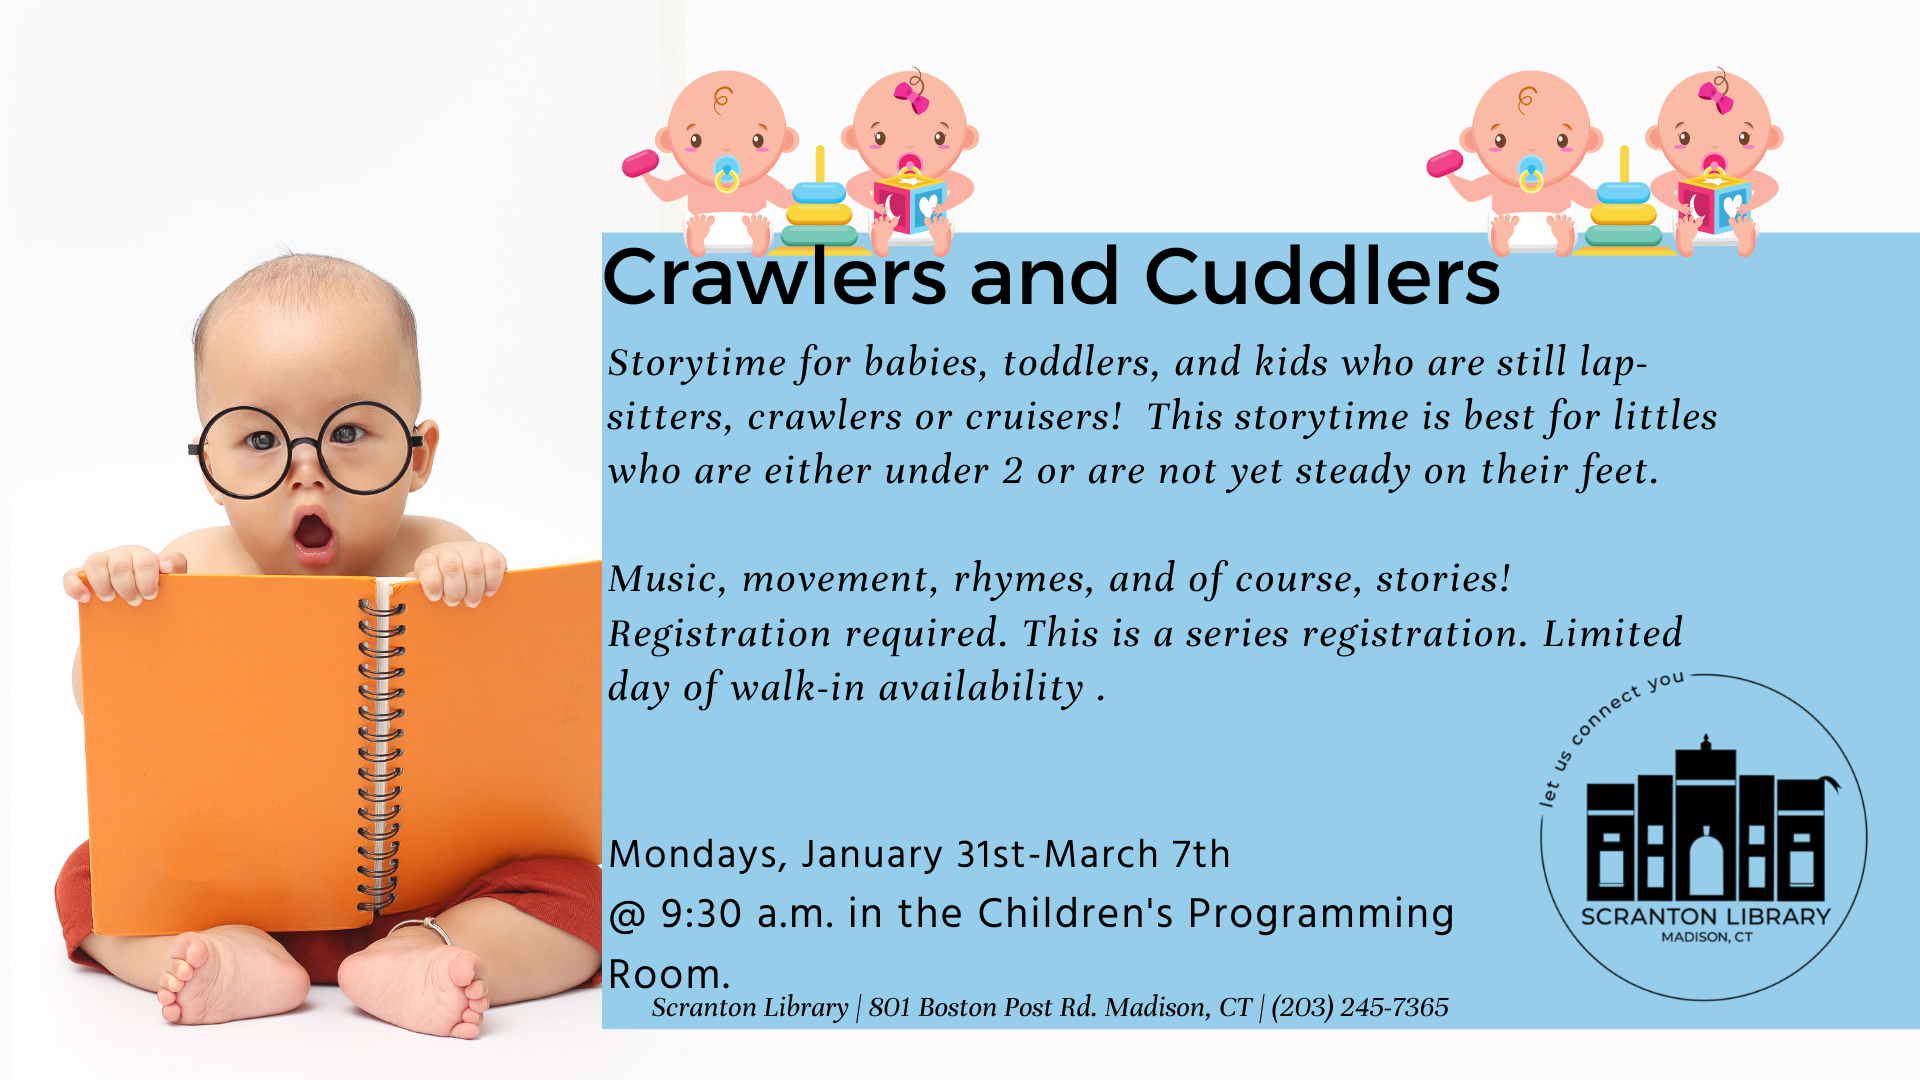 Crawler's and Cuddlers 